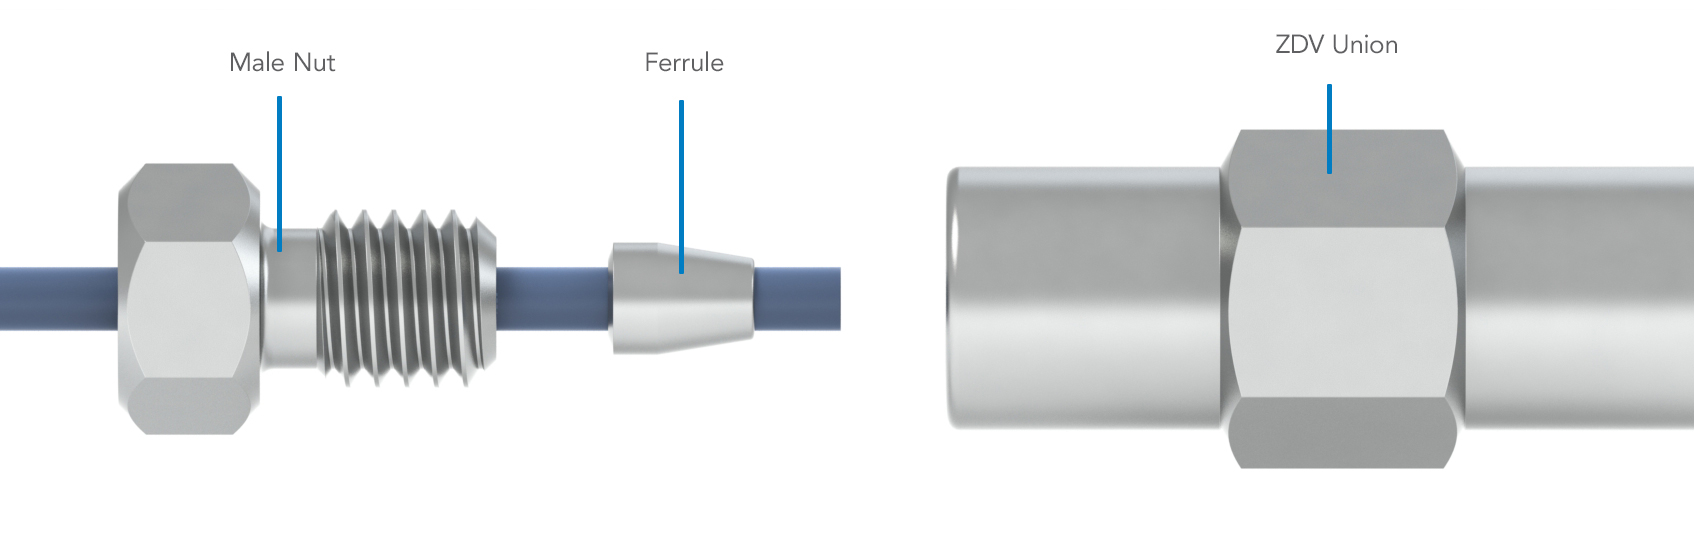 illustration of how to add a male nut and ferrule to a piece of tubing